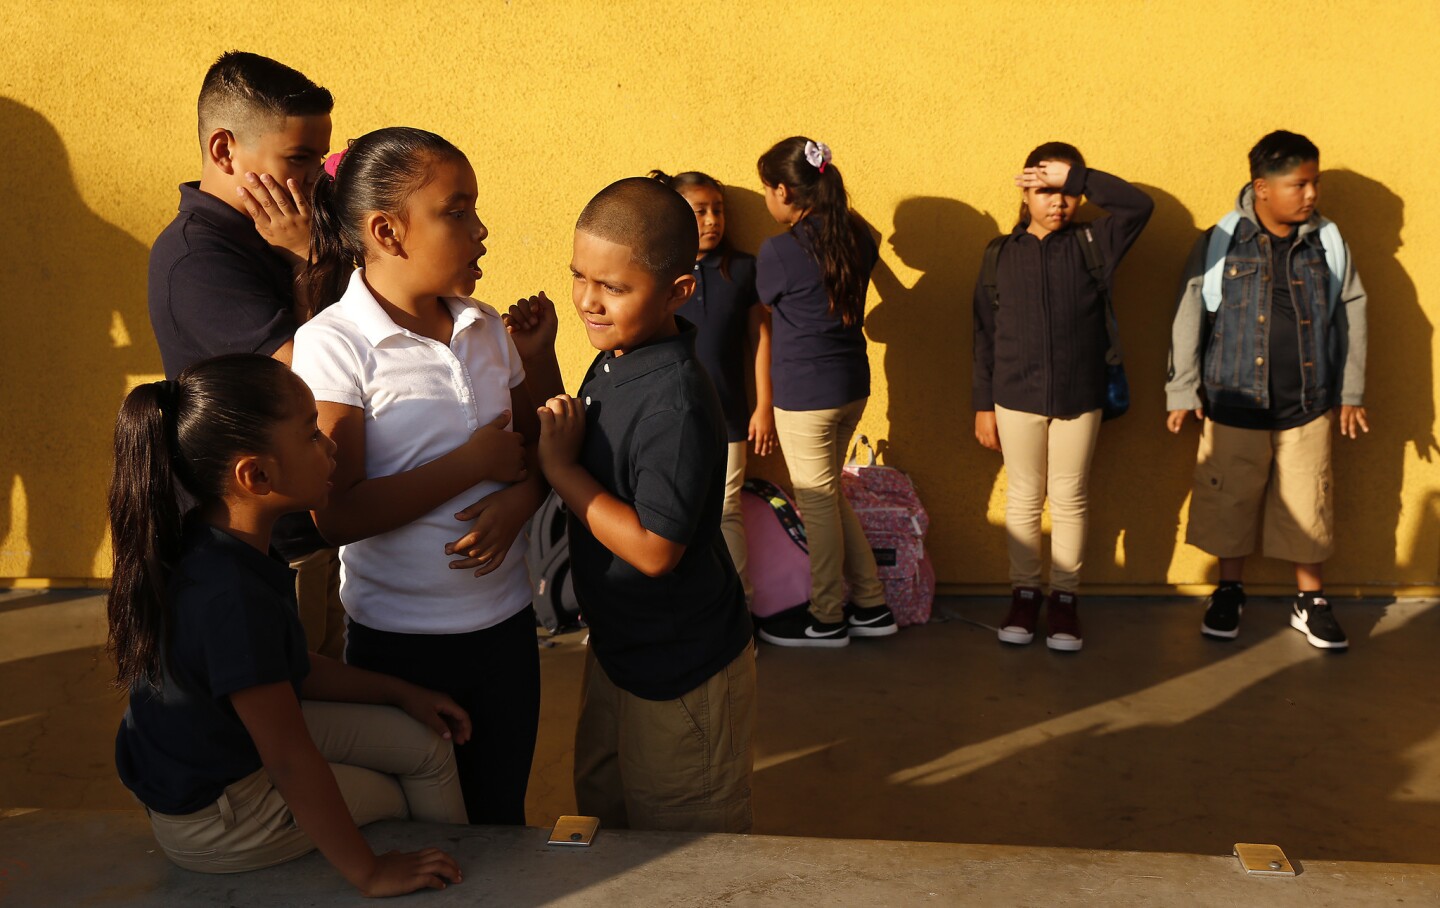 Leslie Toriz, in white shirt, plays with her cousin Alex Toriz as the third-graders wait for doors to open on their first day back at Dolores Huerta Elementary School in Los Angeles on Tuesday.